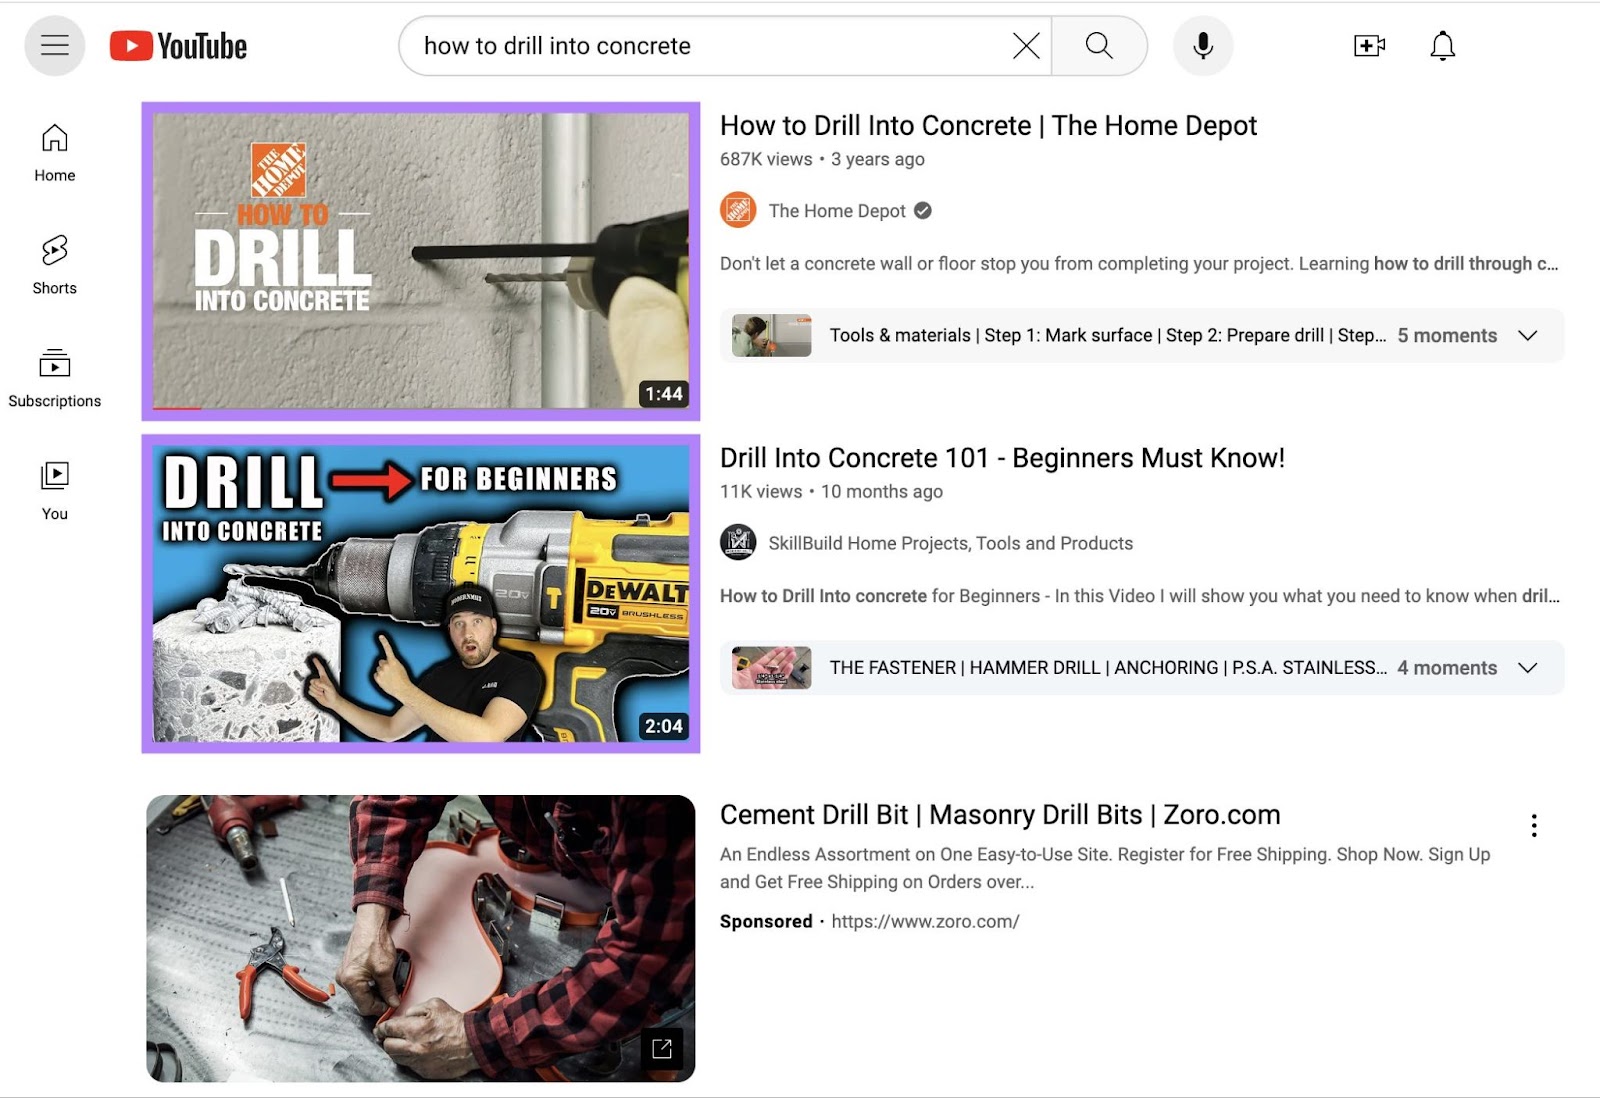 YouTube video thumbnails highlighted in the results for "how to drill into concrete" search